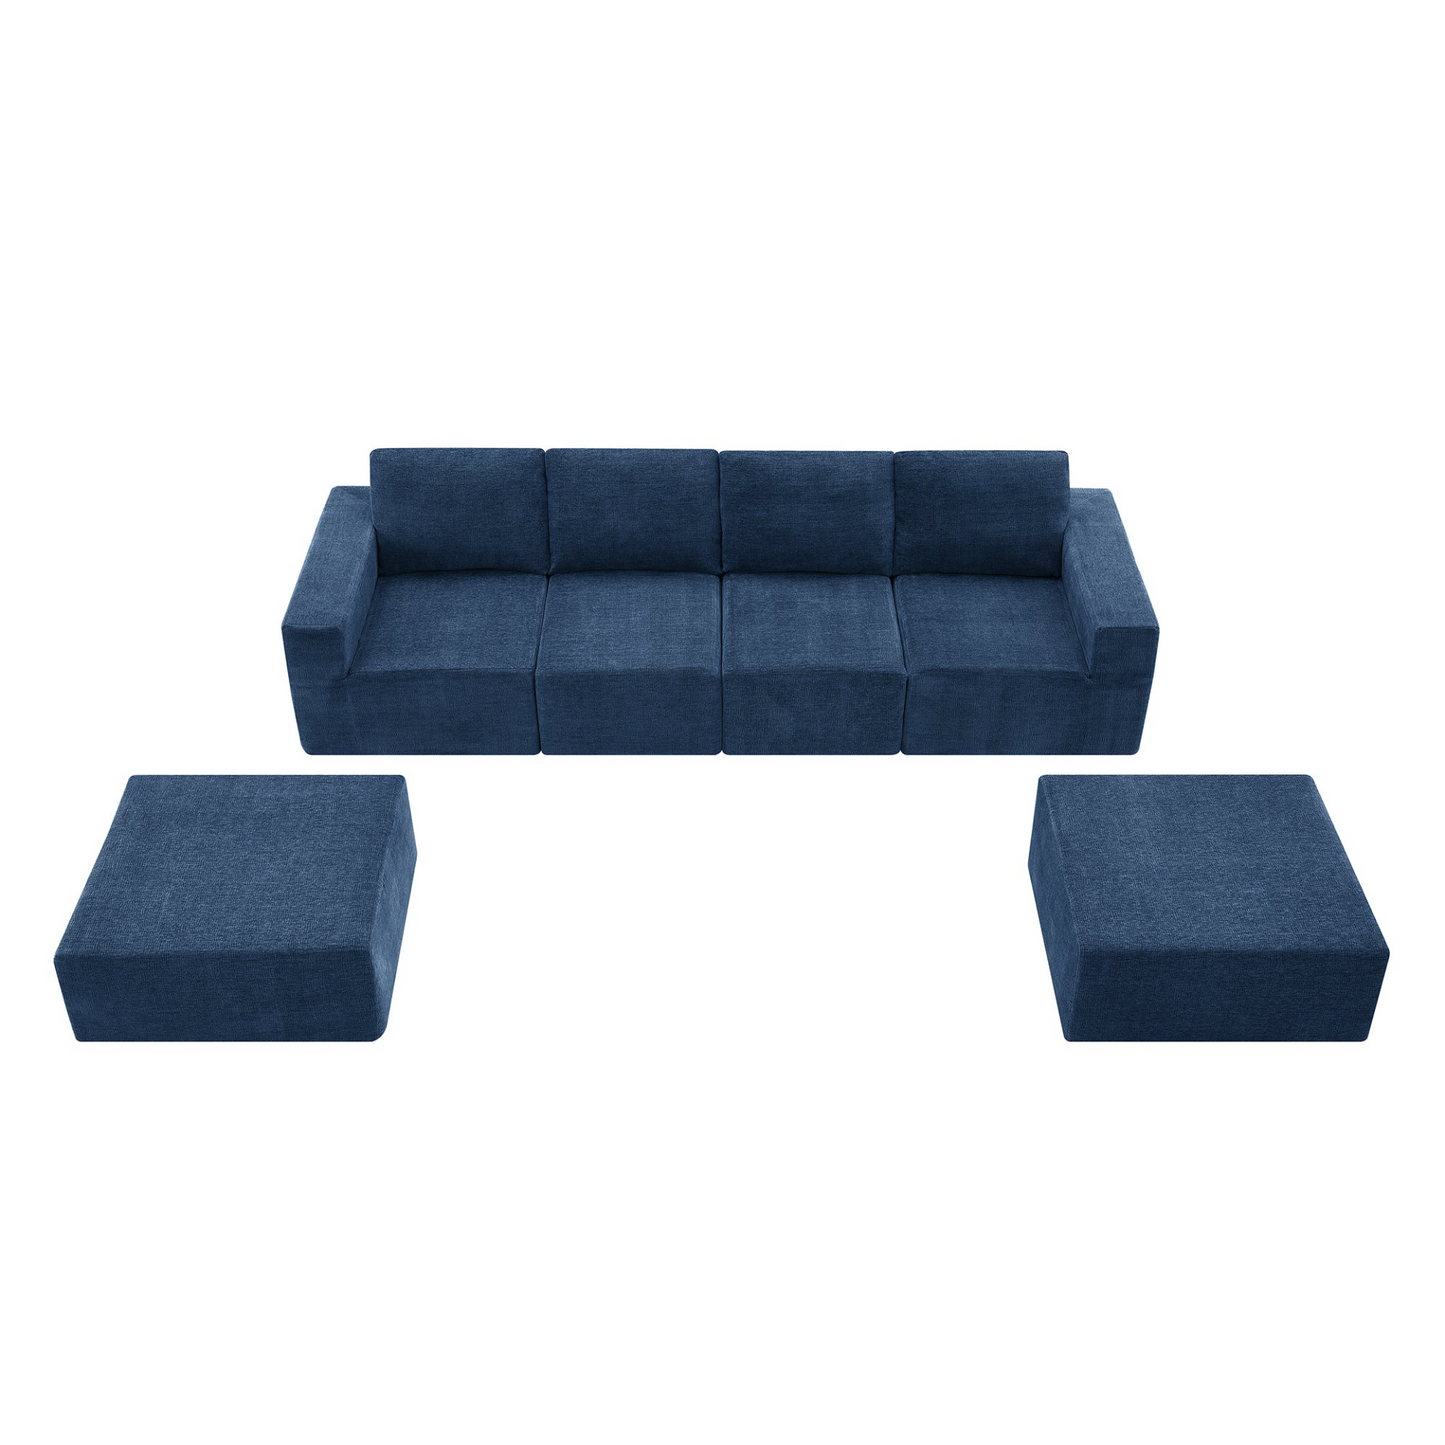 110*72" Modular U Shaped Sectional Sofa,Luxury Chenille Floor Couch Set,Upholstered Indoor Furniture,Foam-Filled Sleeper Sofa Bed for Living Room,Bedroom,Free Combination,3 Colors